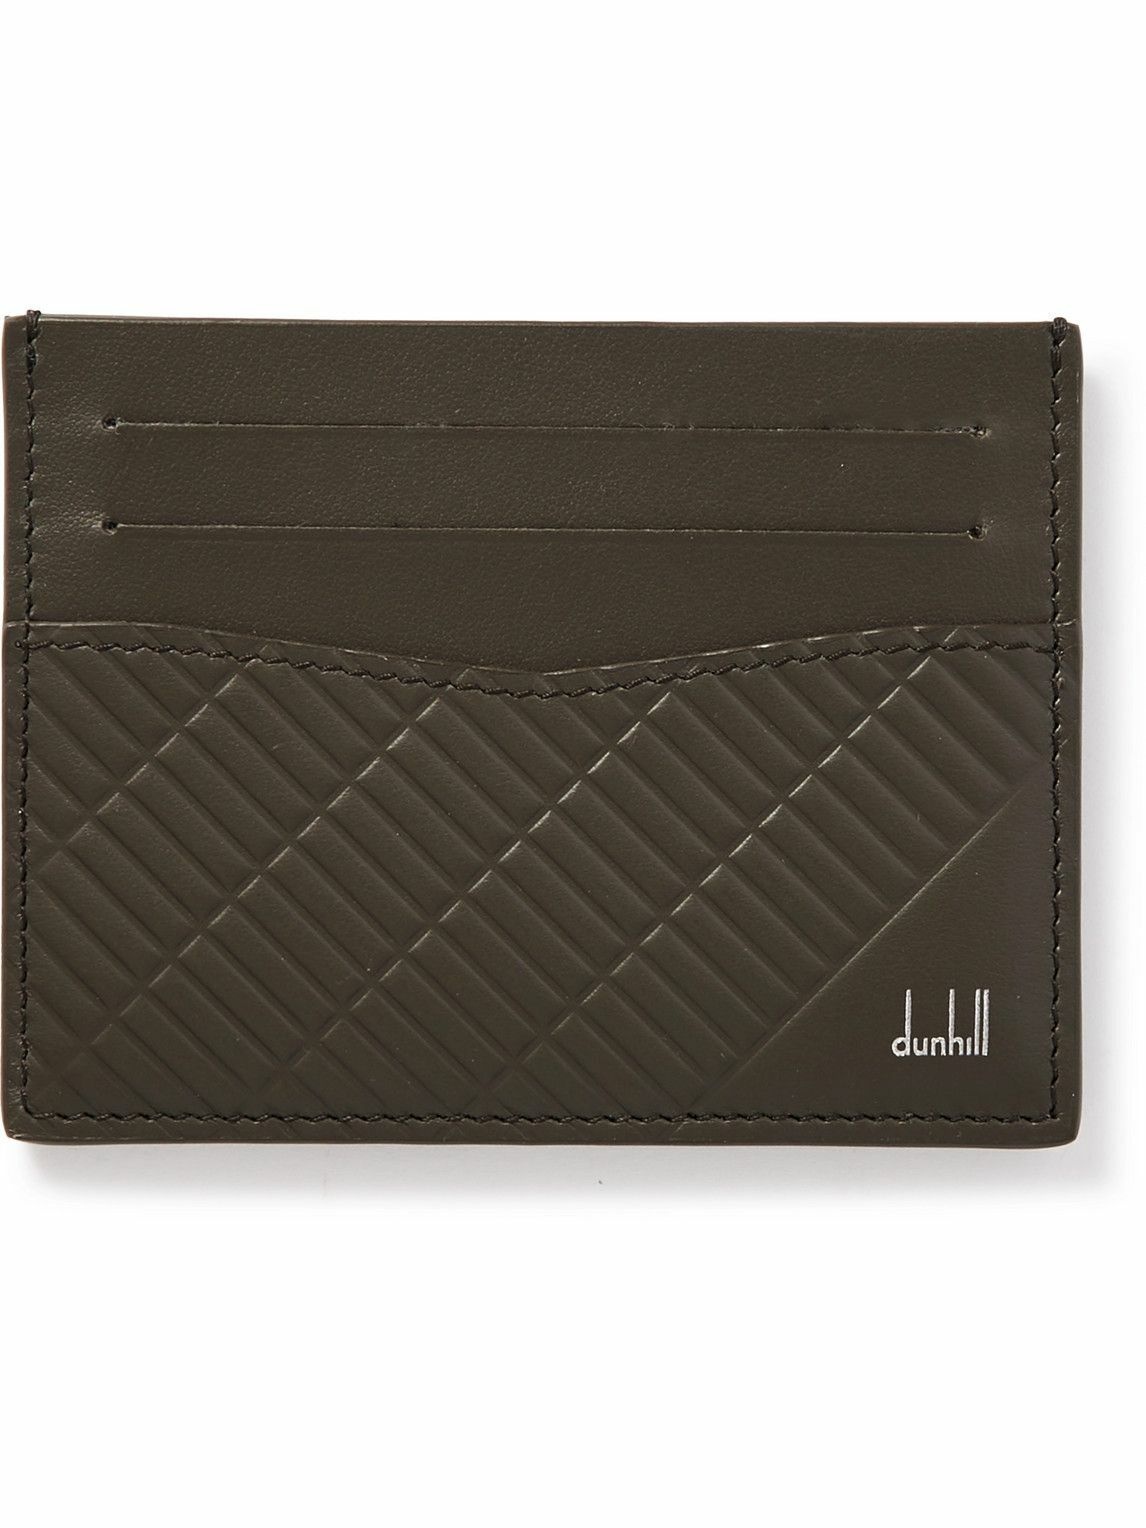 Photo: Dunhill - Contour Embossed Leather Cardholder